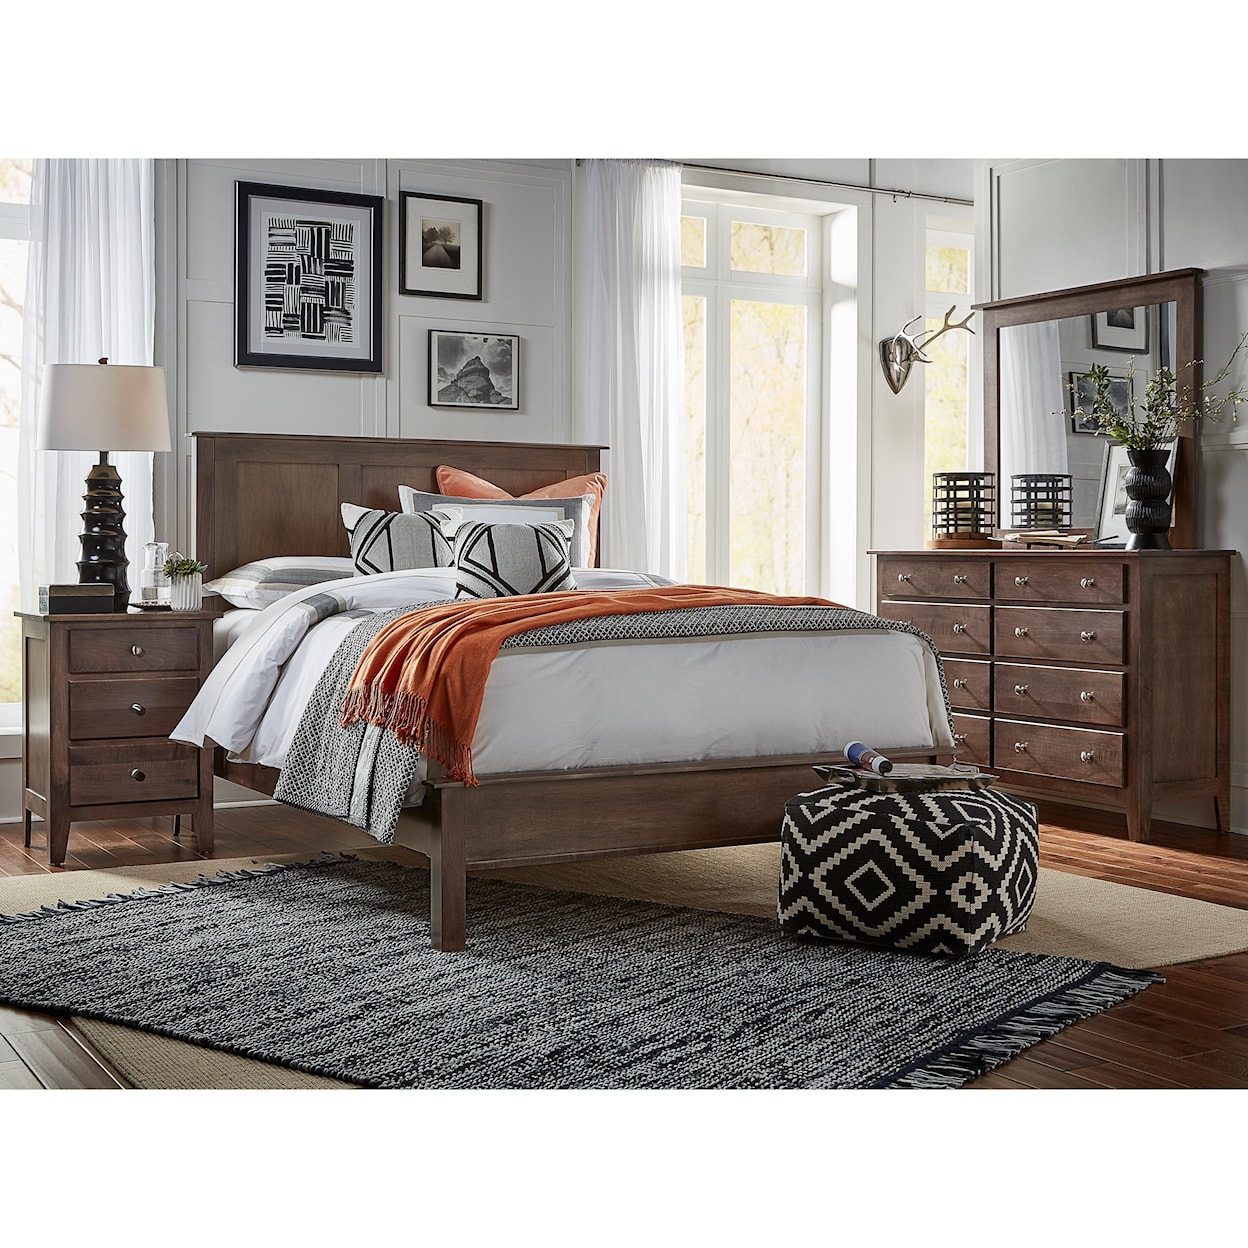 Daniels Amish Mapleton Queen Bed with Low Footboard